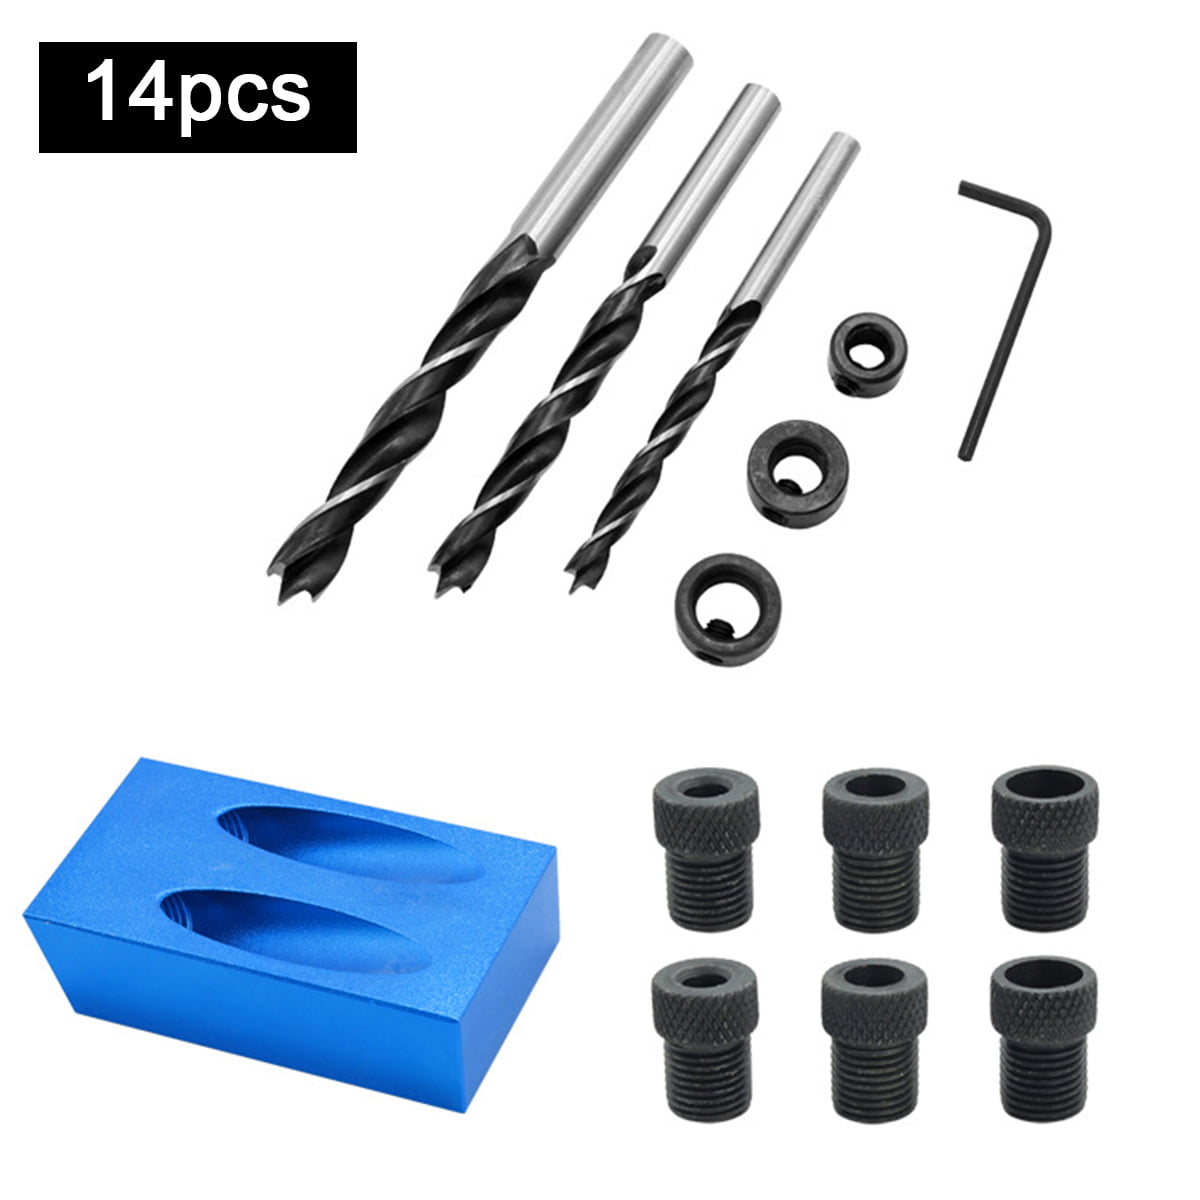 14pcs Pocket Hole Jig Kit 15 Degree Angle Oblique Drill Guide Puncher 